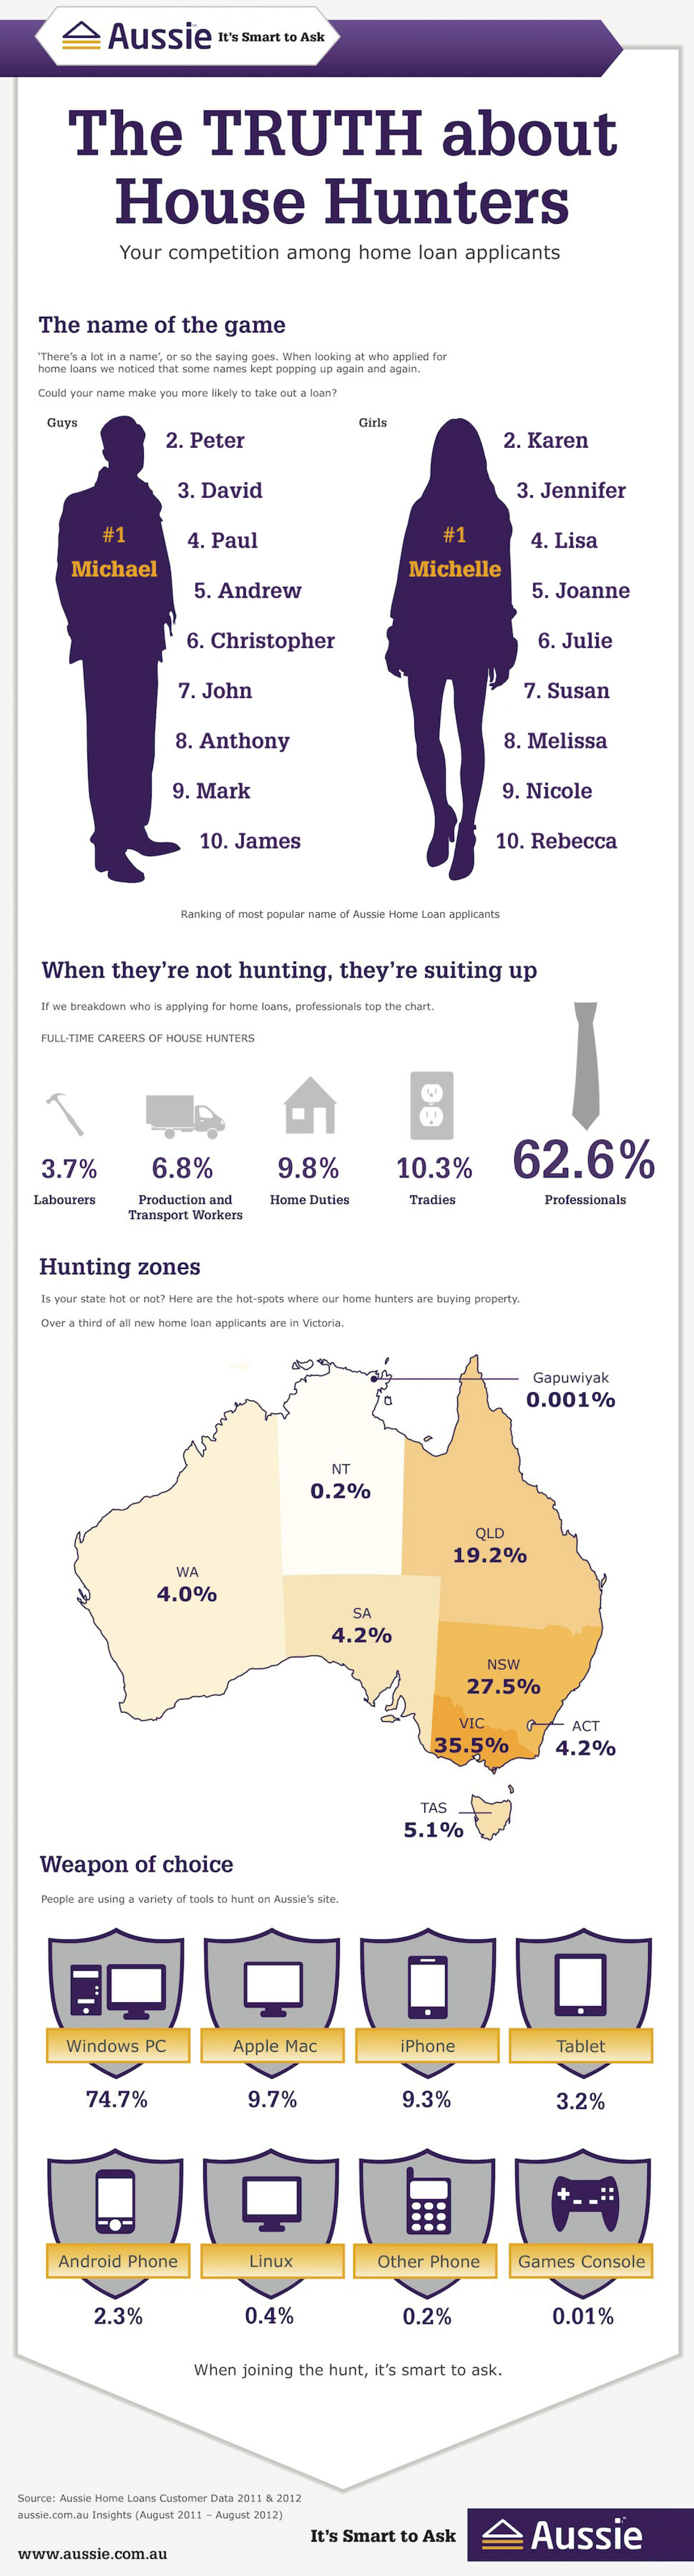 The Truth about House Hunters Infographic